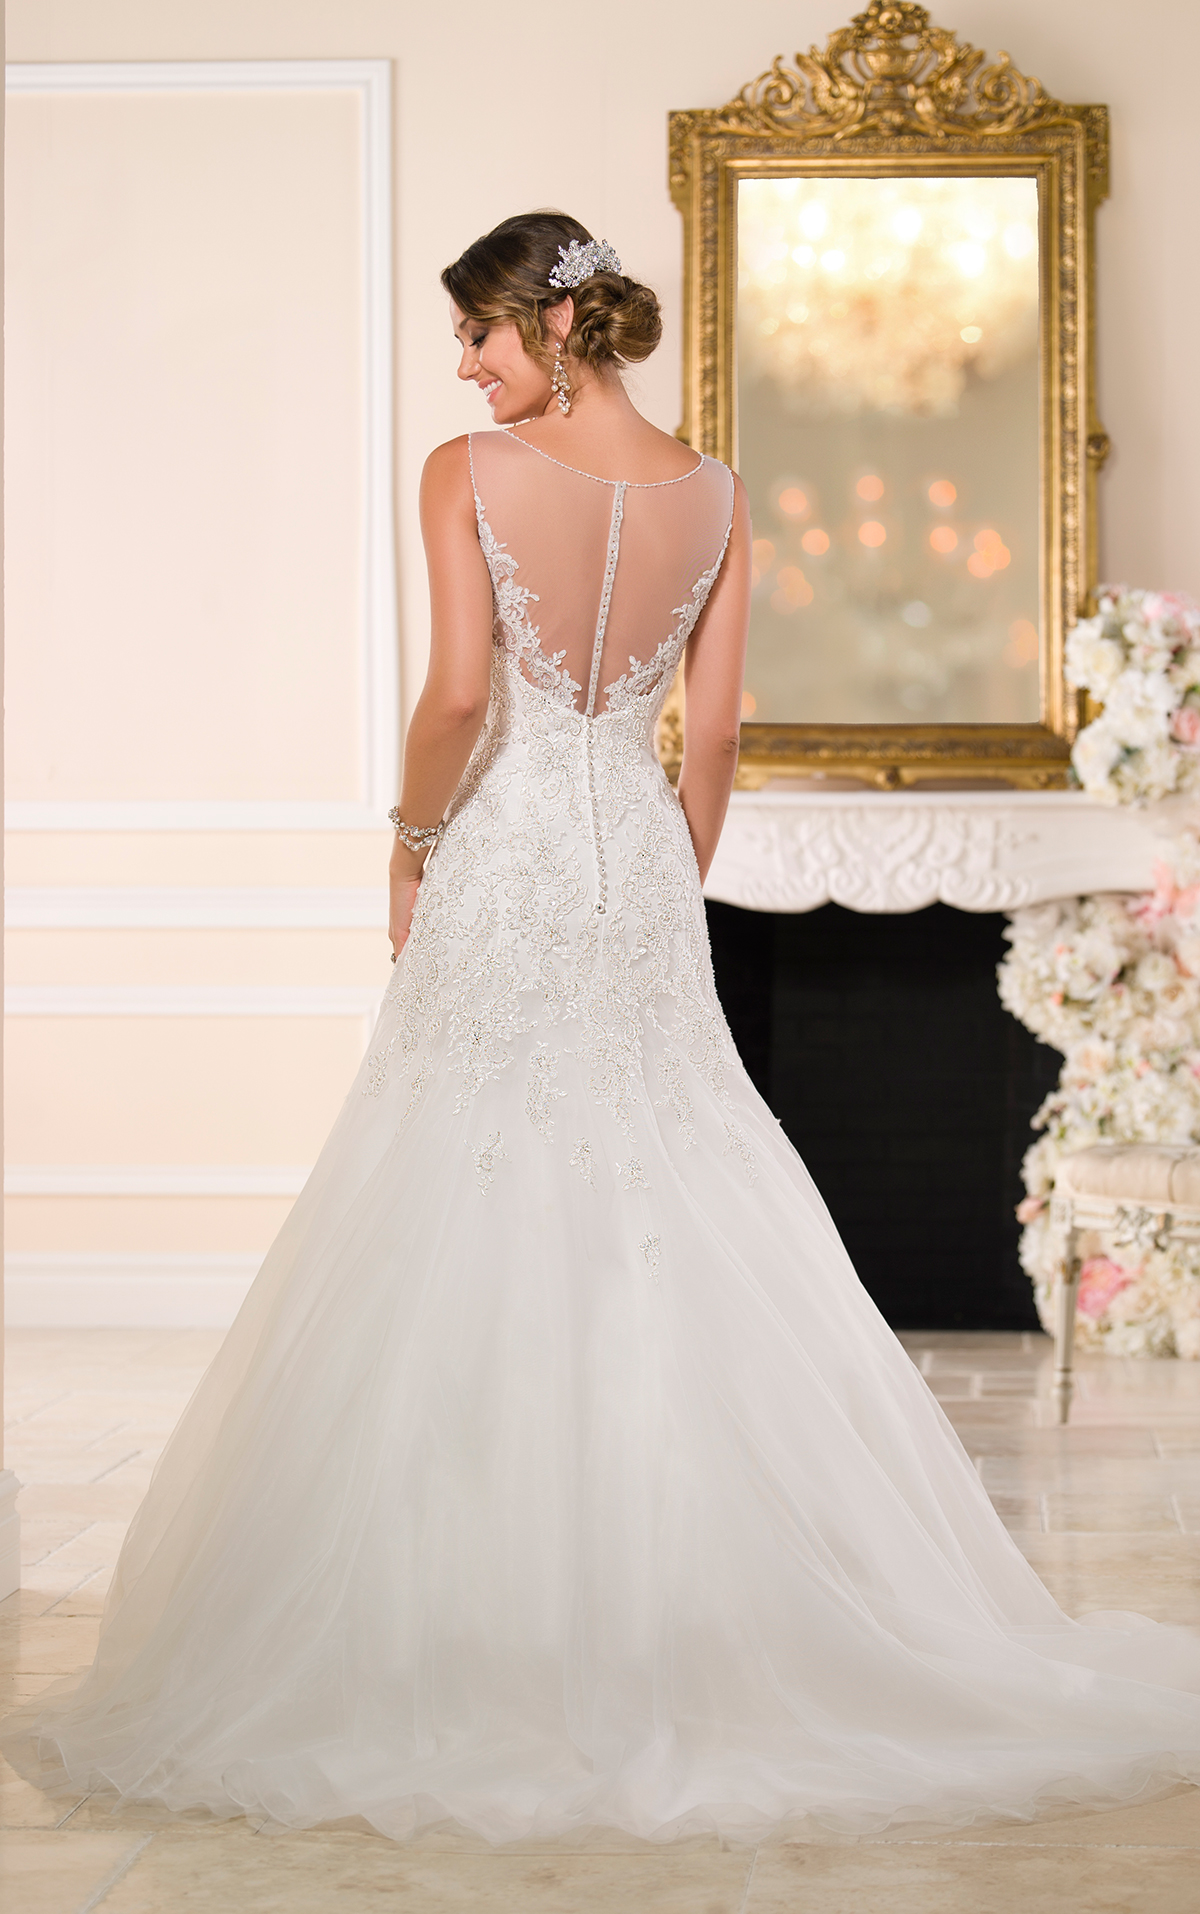 12 Beautiful Backless Wedding Dresses & Gowns